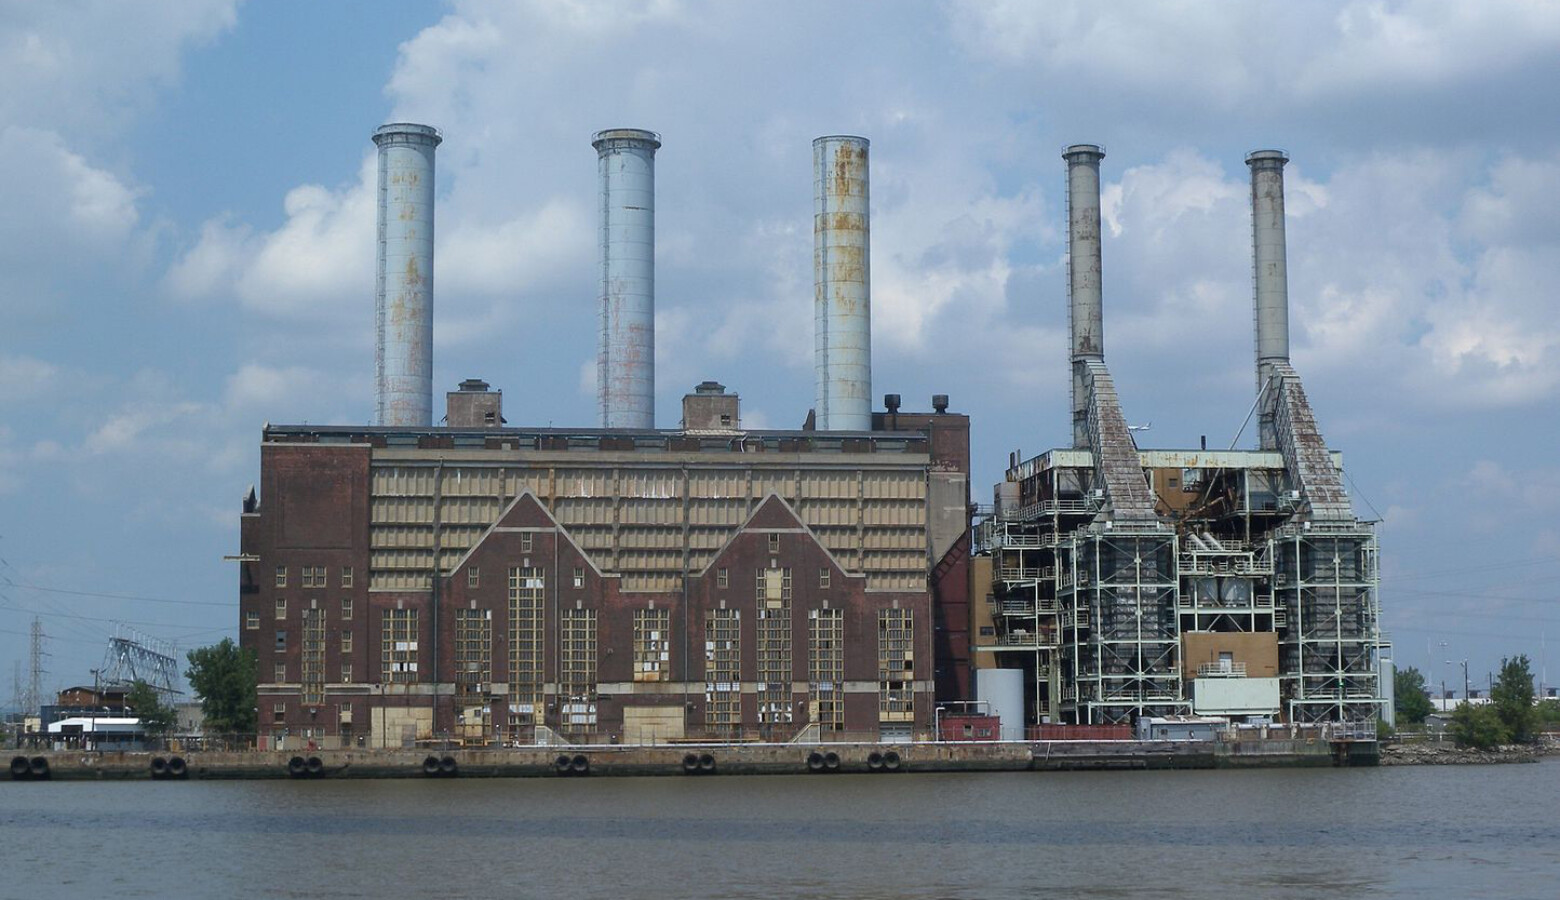 The Kearny Generating Station is a small natural gas plant or "peaking power plant" in New Jersey much like the ones CenterPoint wants to build. (King of Hearts/Wikimedia Commons)